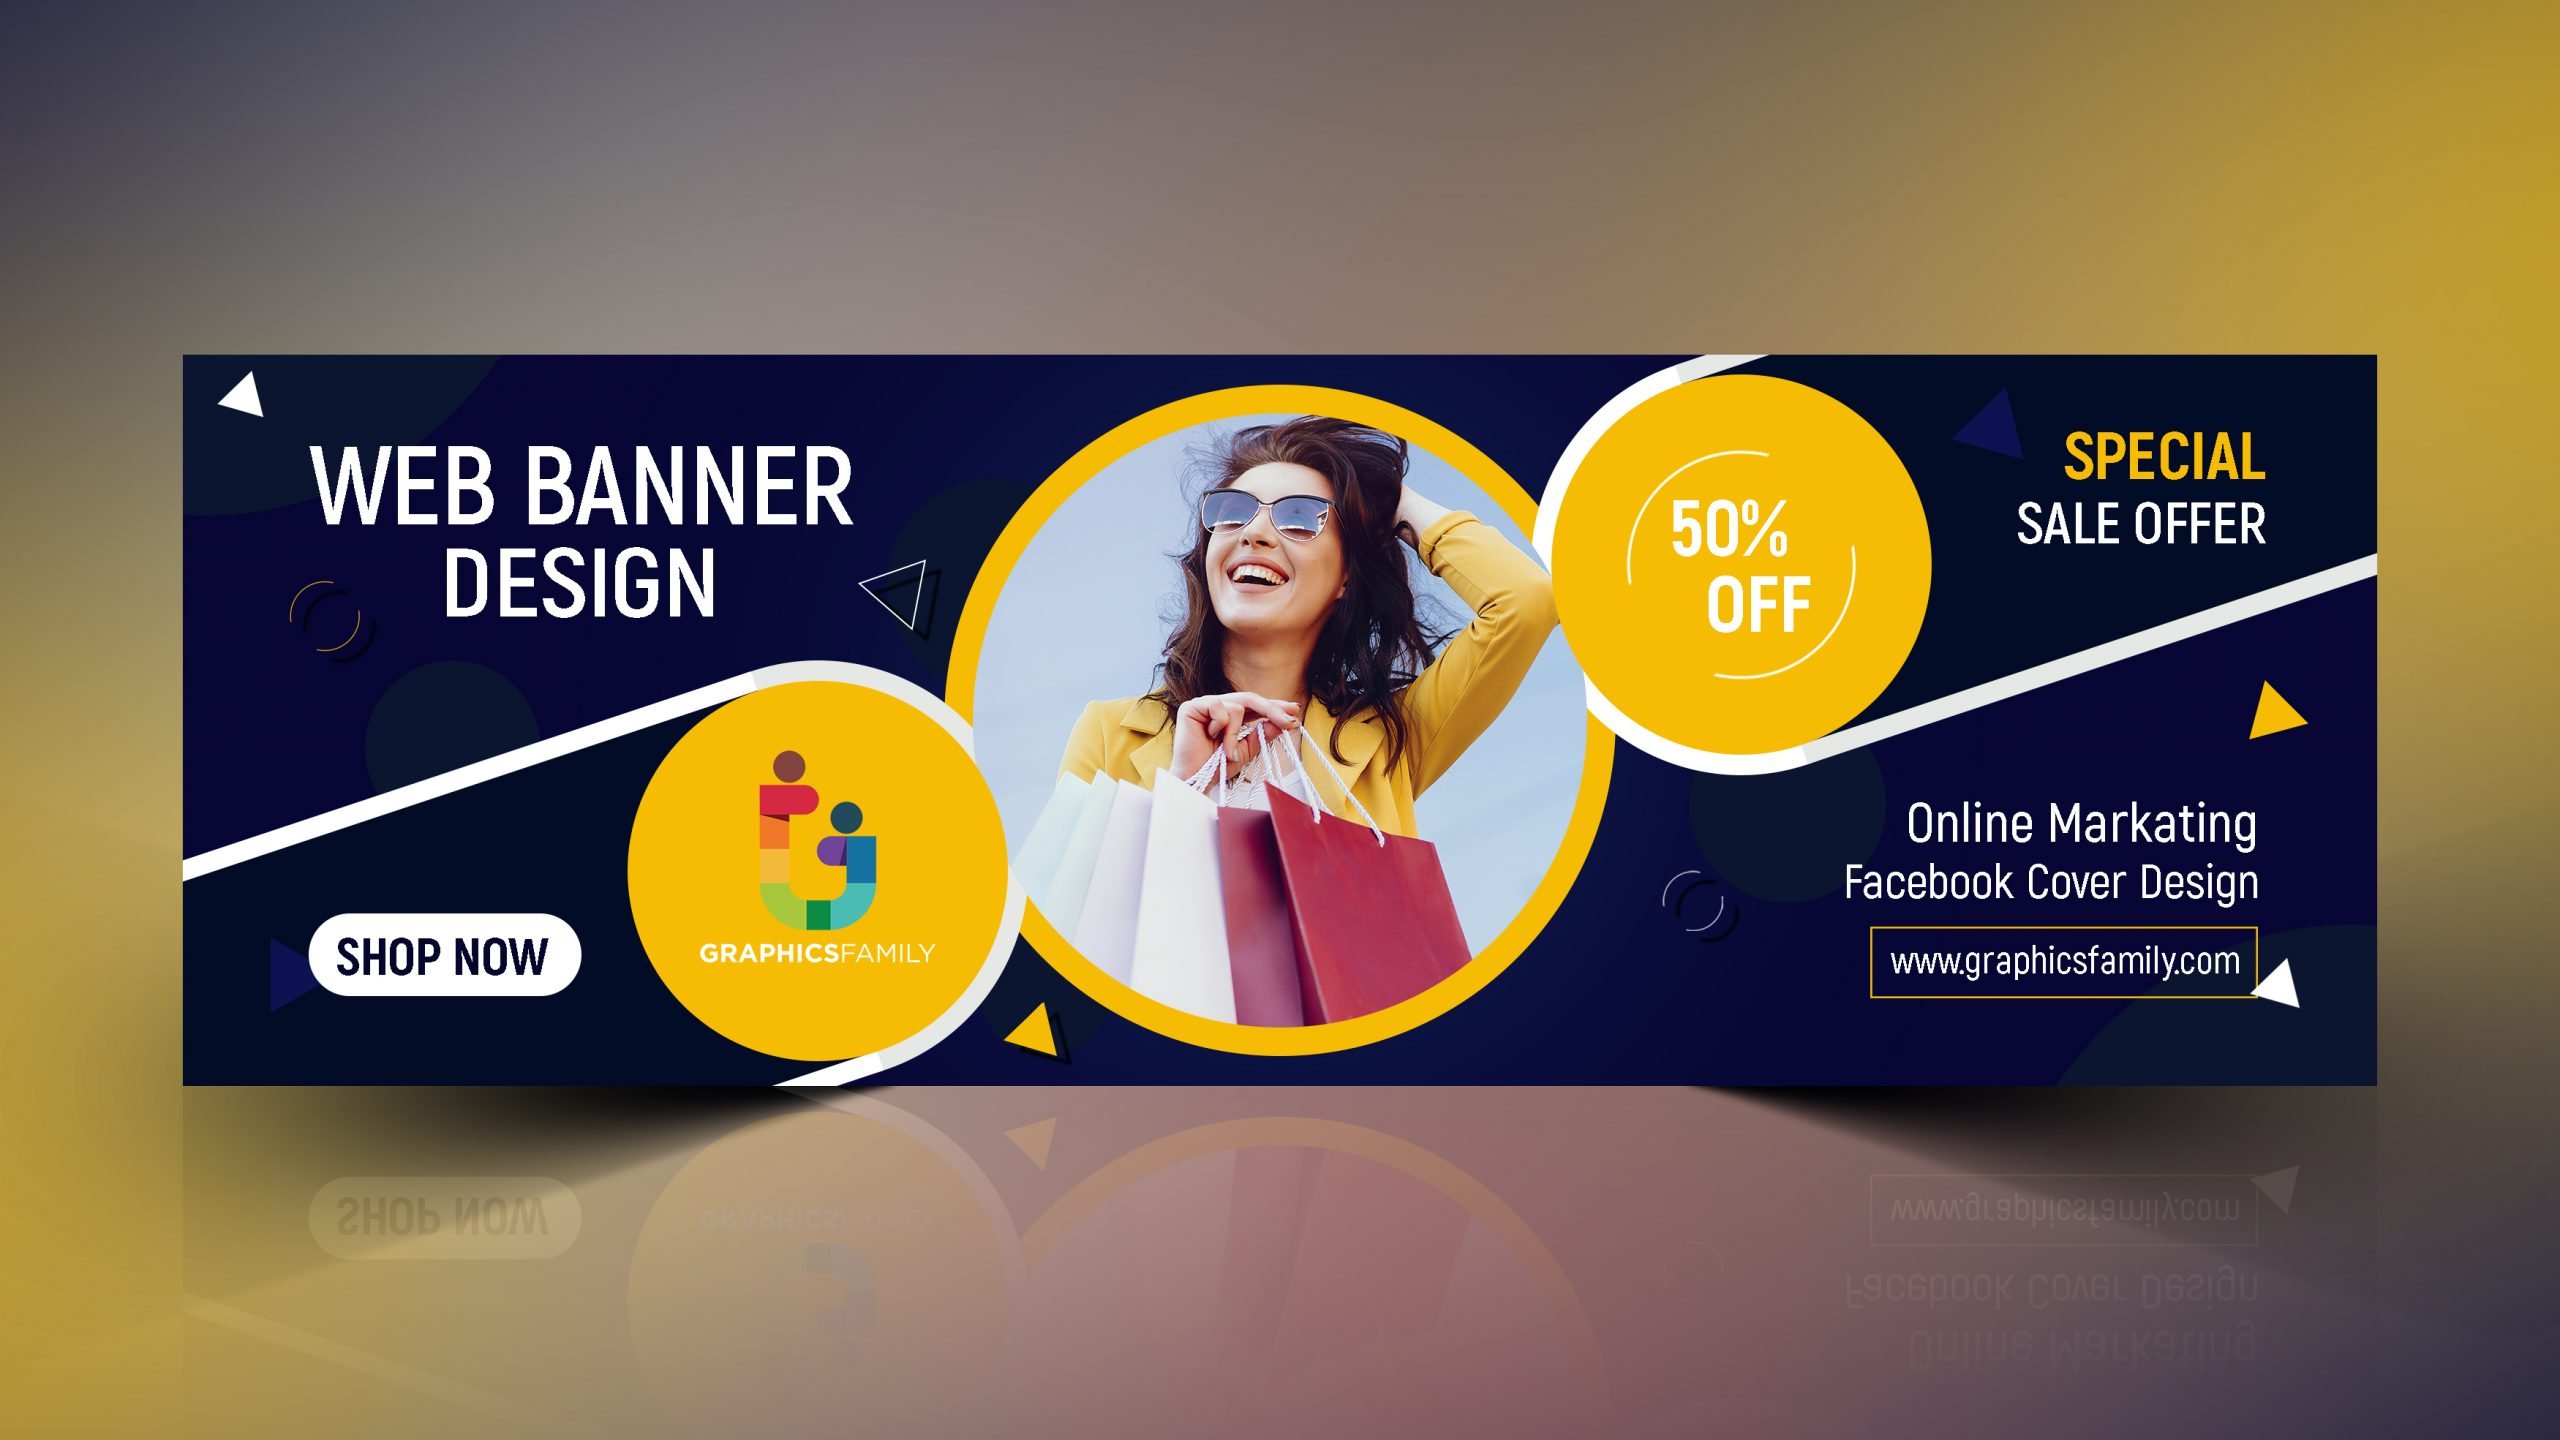 Online Marketing Facebook Cover Design – GraphicsFamily